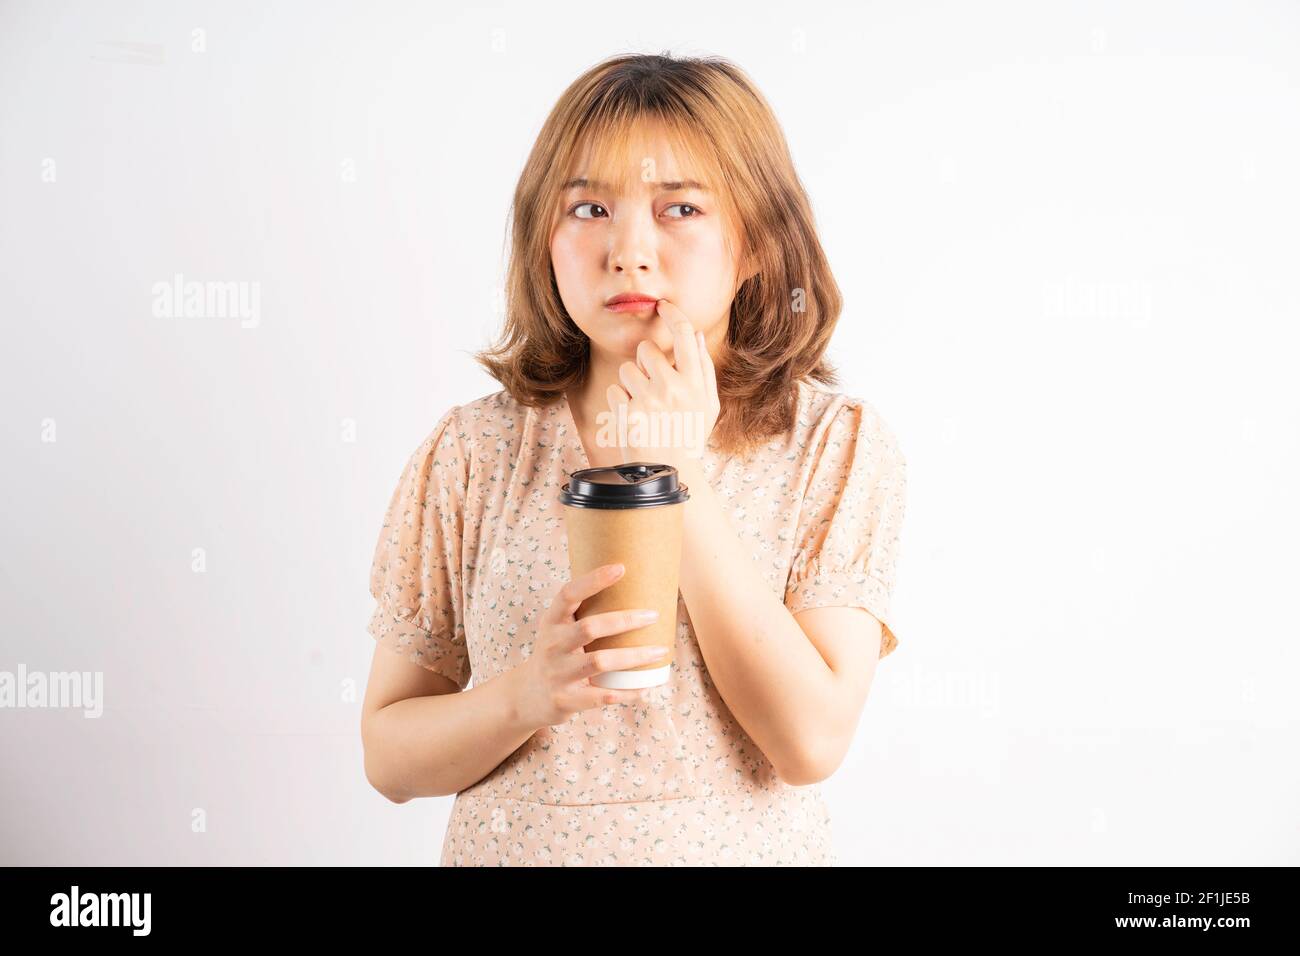 Young asian girl holding coffee cup with expression on background Stock Photo